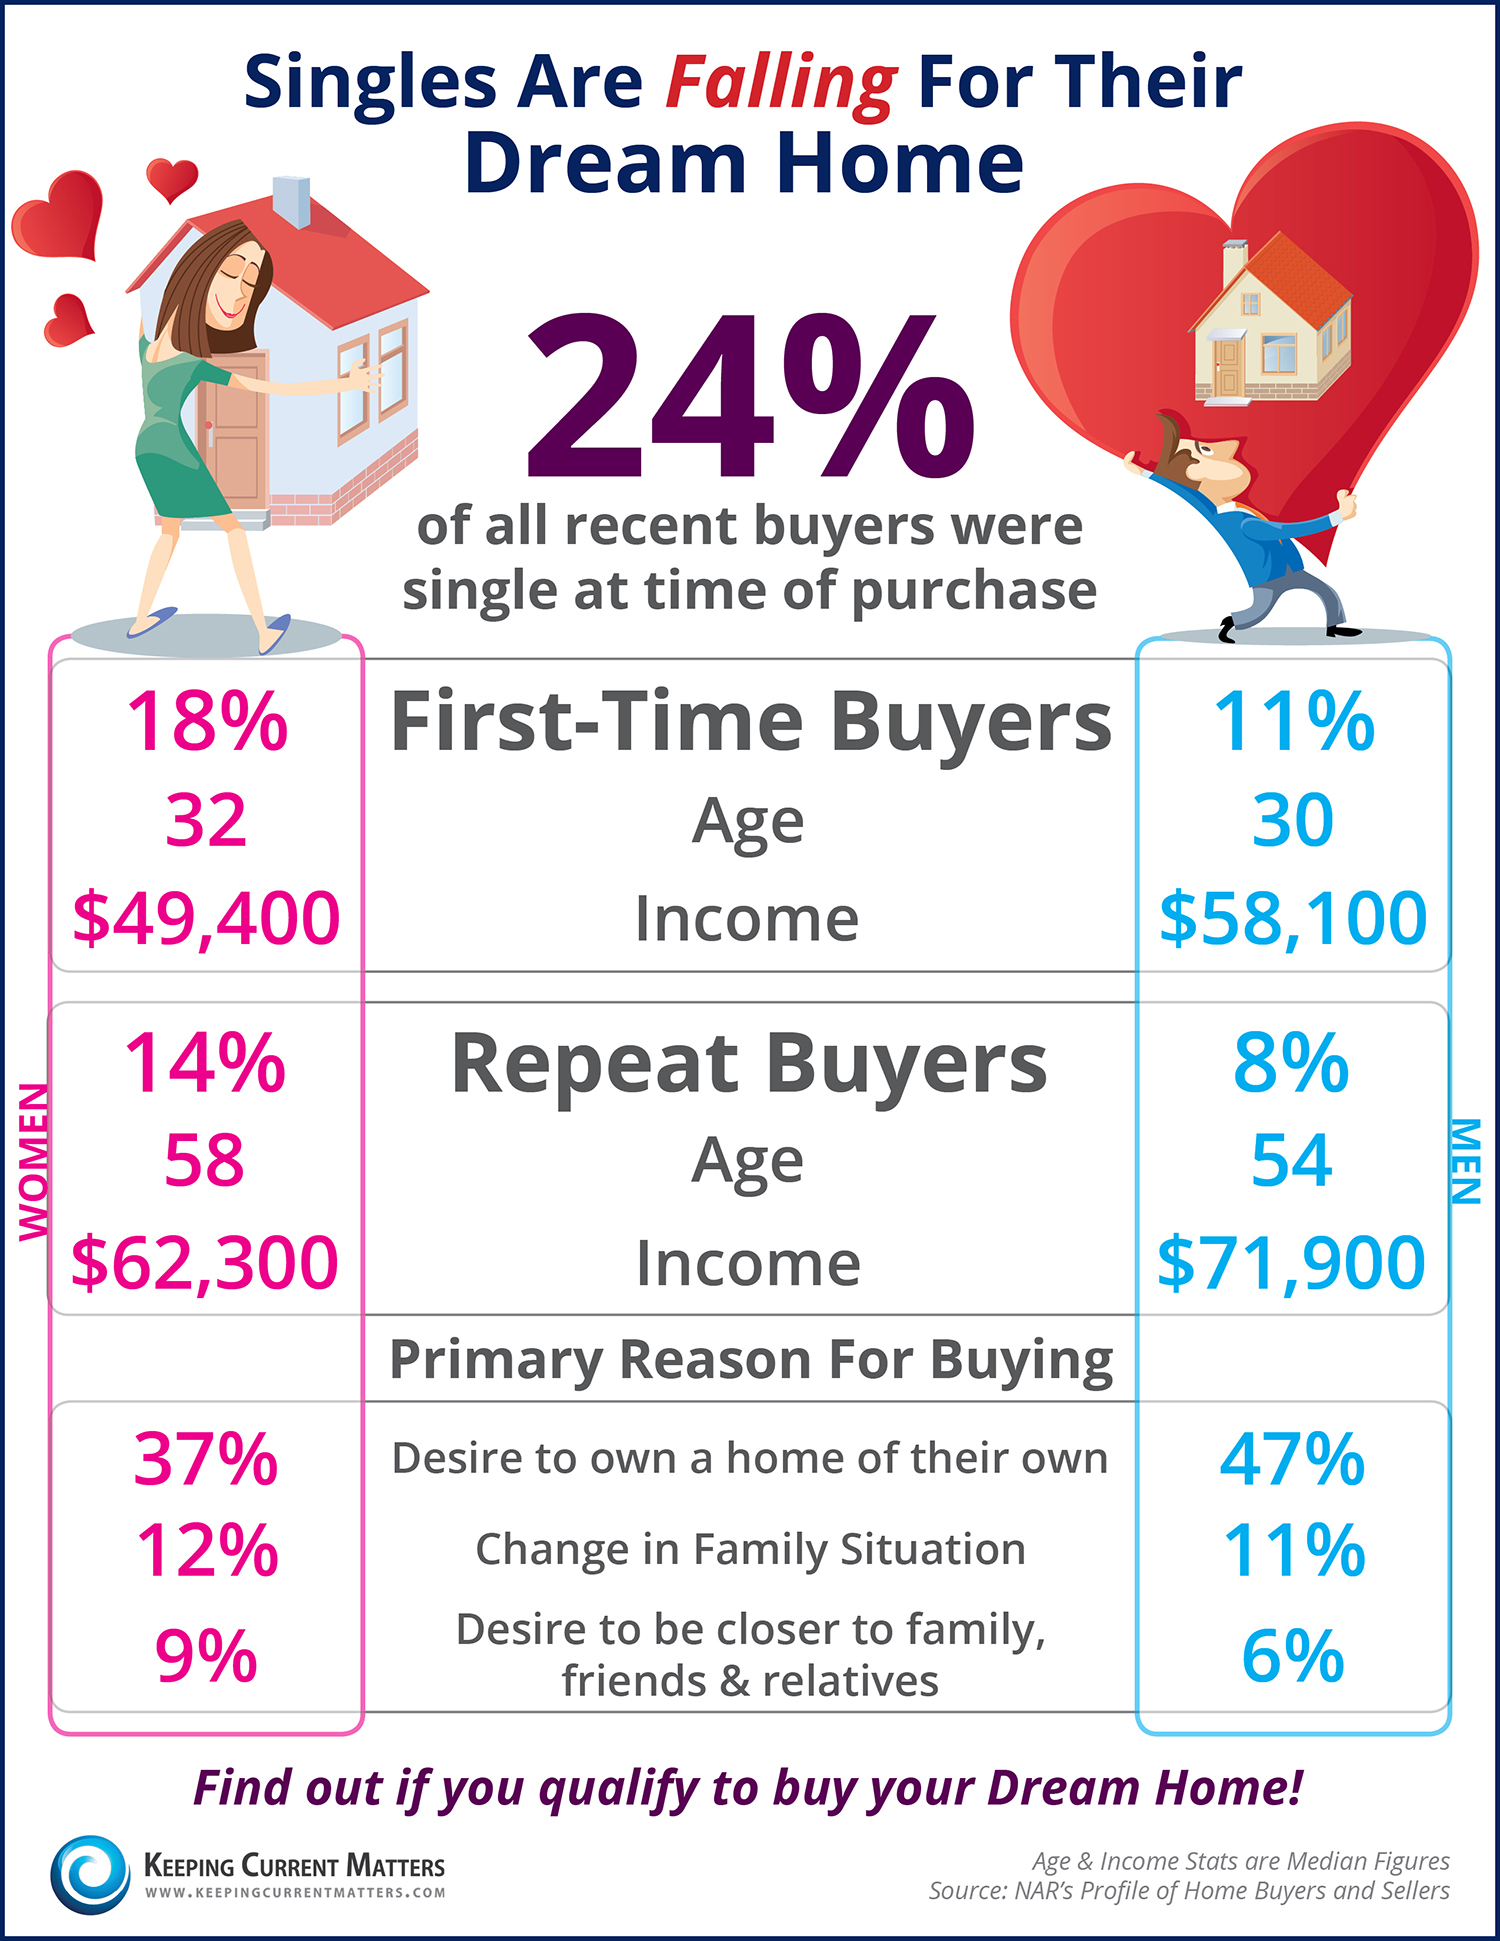 Singles Are Falling For Their Dream Home | Keeping Current Matters